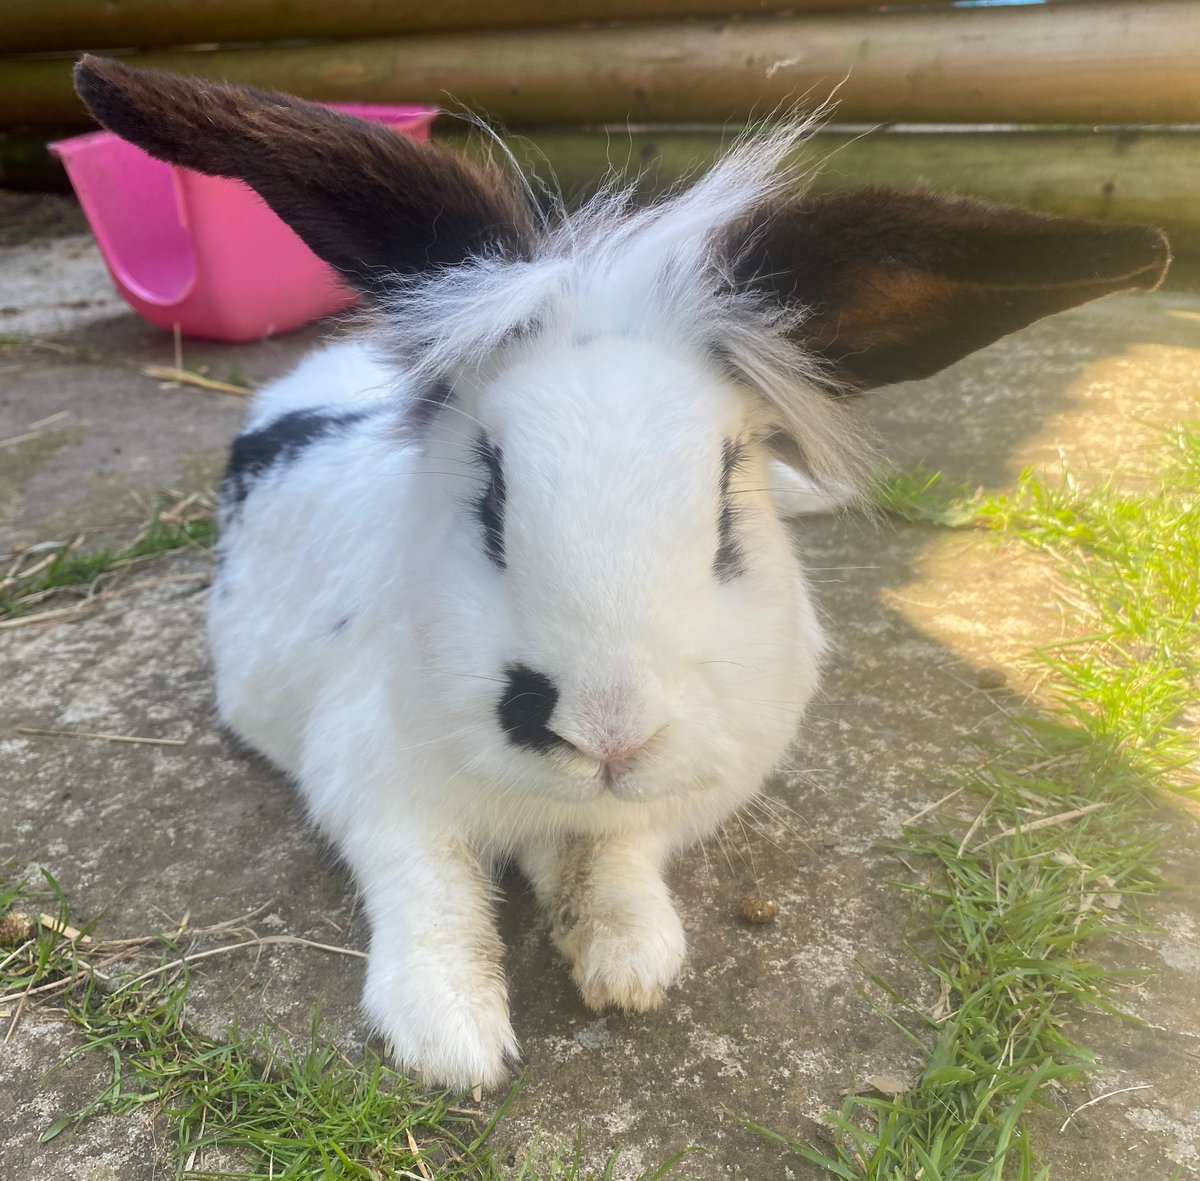 Our beautiful Clover is around 14-years-old and one of the sweetest bunnies that ever there was! She was saved some years ago from being fed to dogs (yes, really!) and has lived here knowing only love ever since. #rabbits #rescueanimals